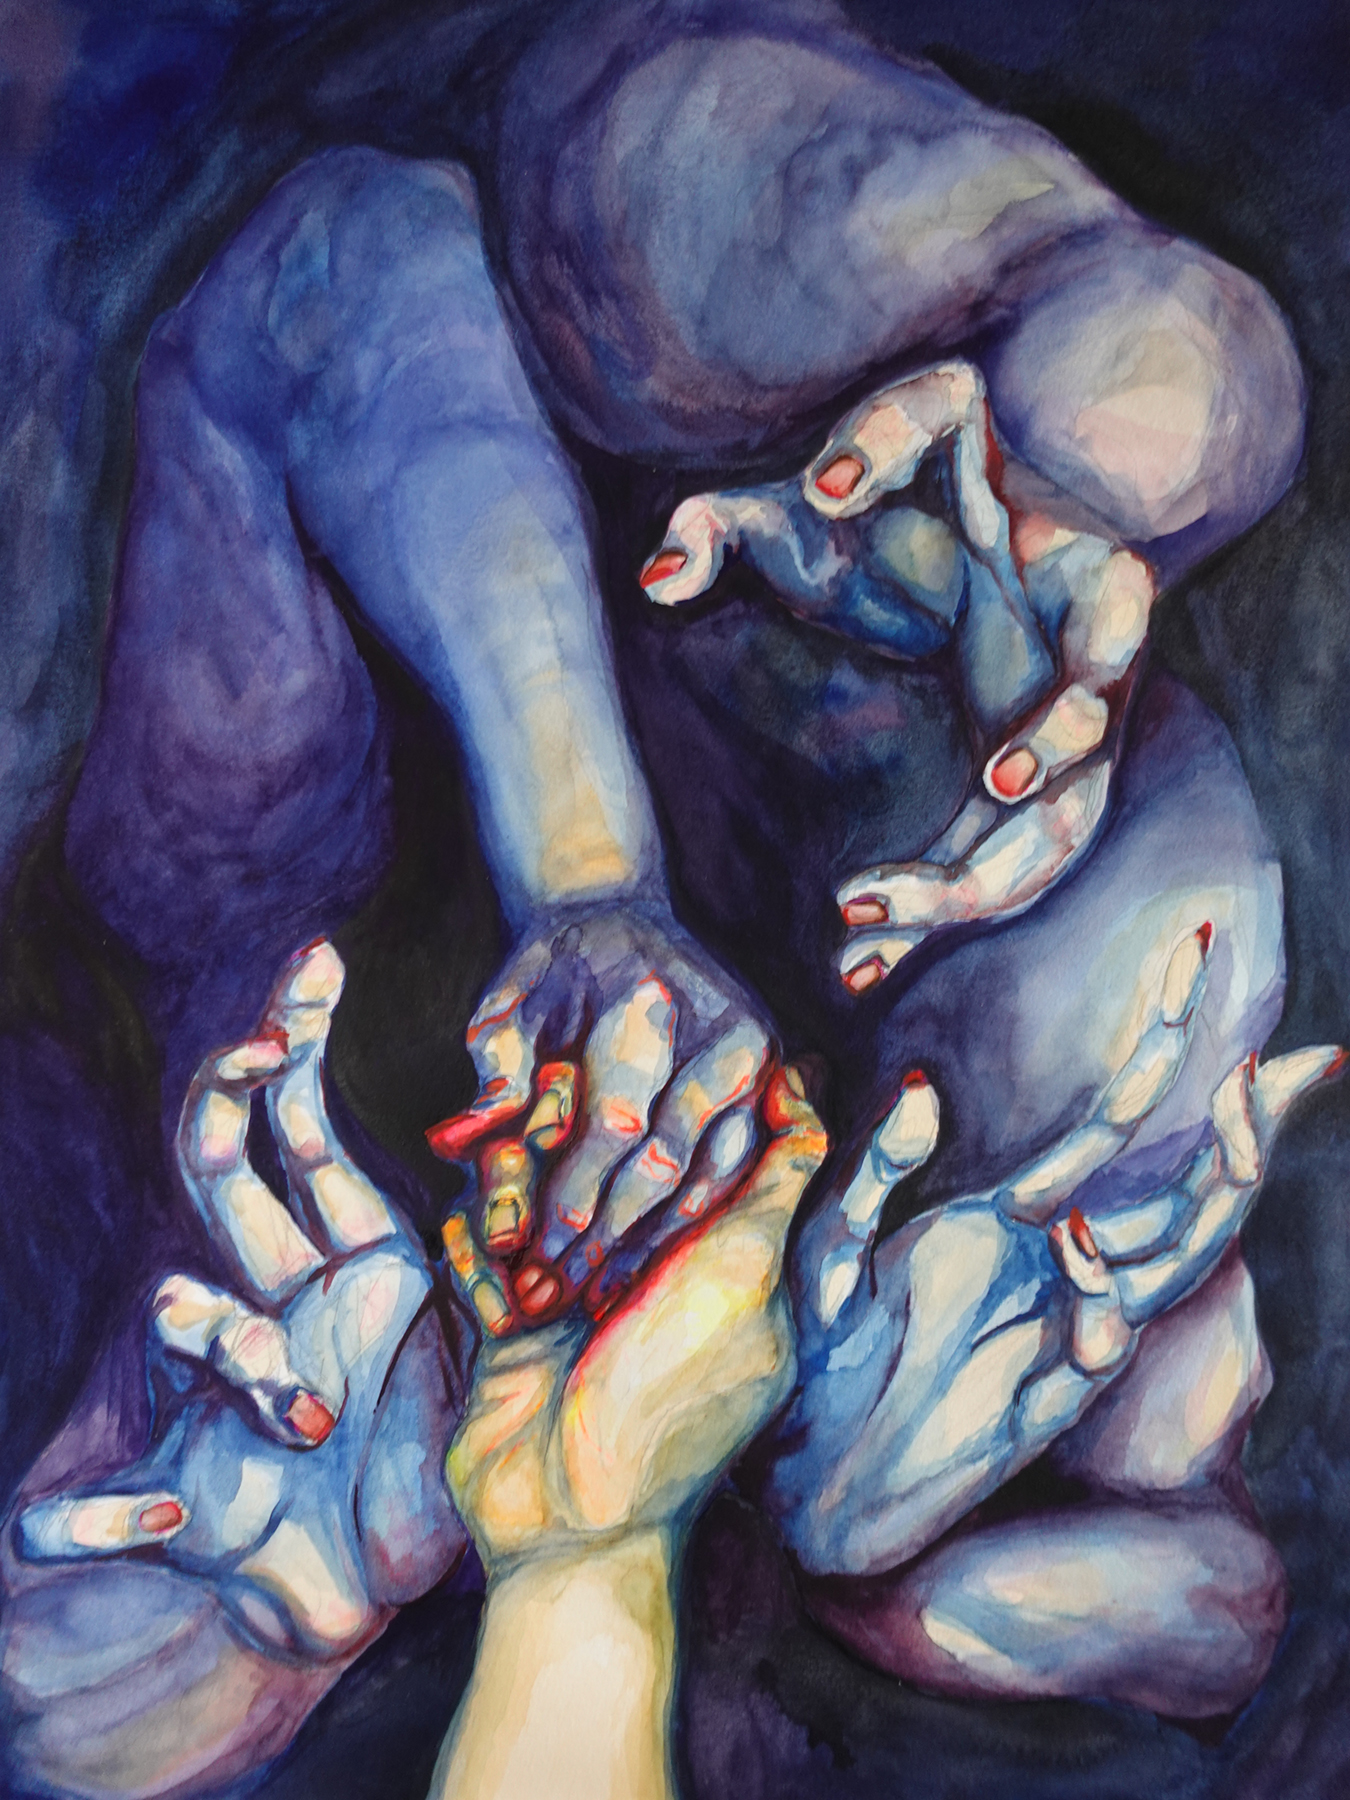 Images of multiple hands, one grasping another. Image courtesy of Daniell Stromanthe